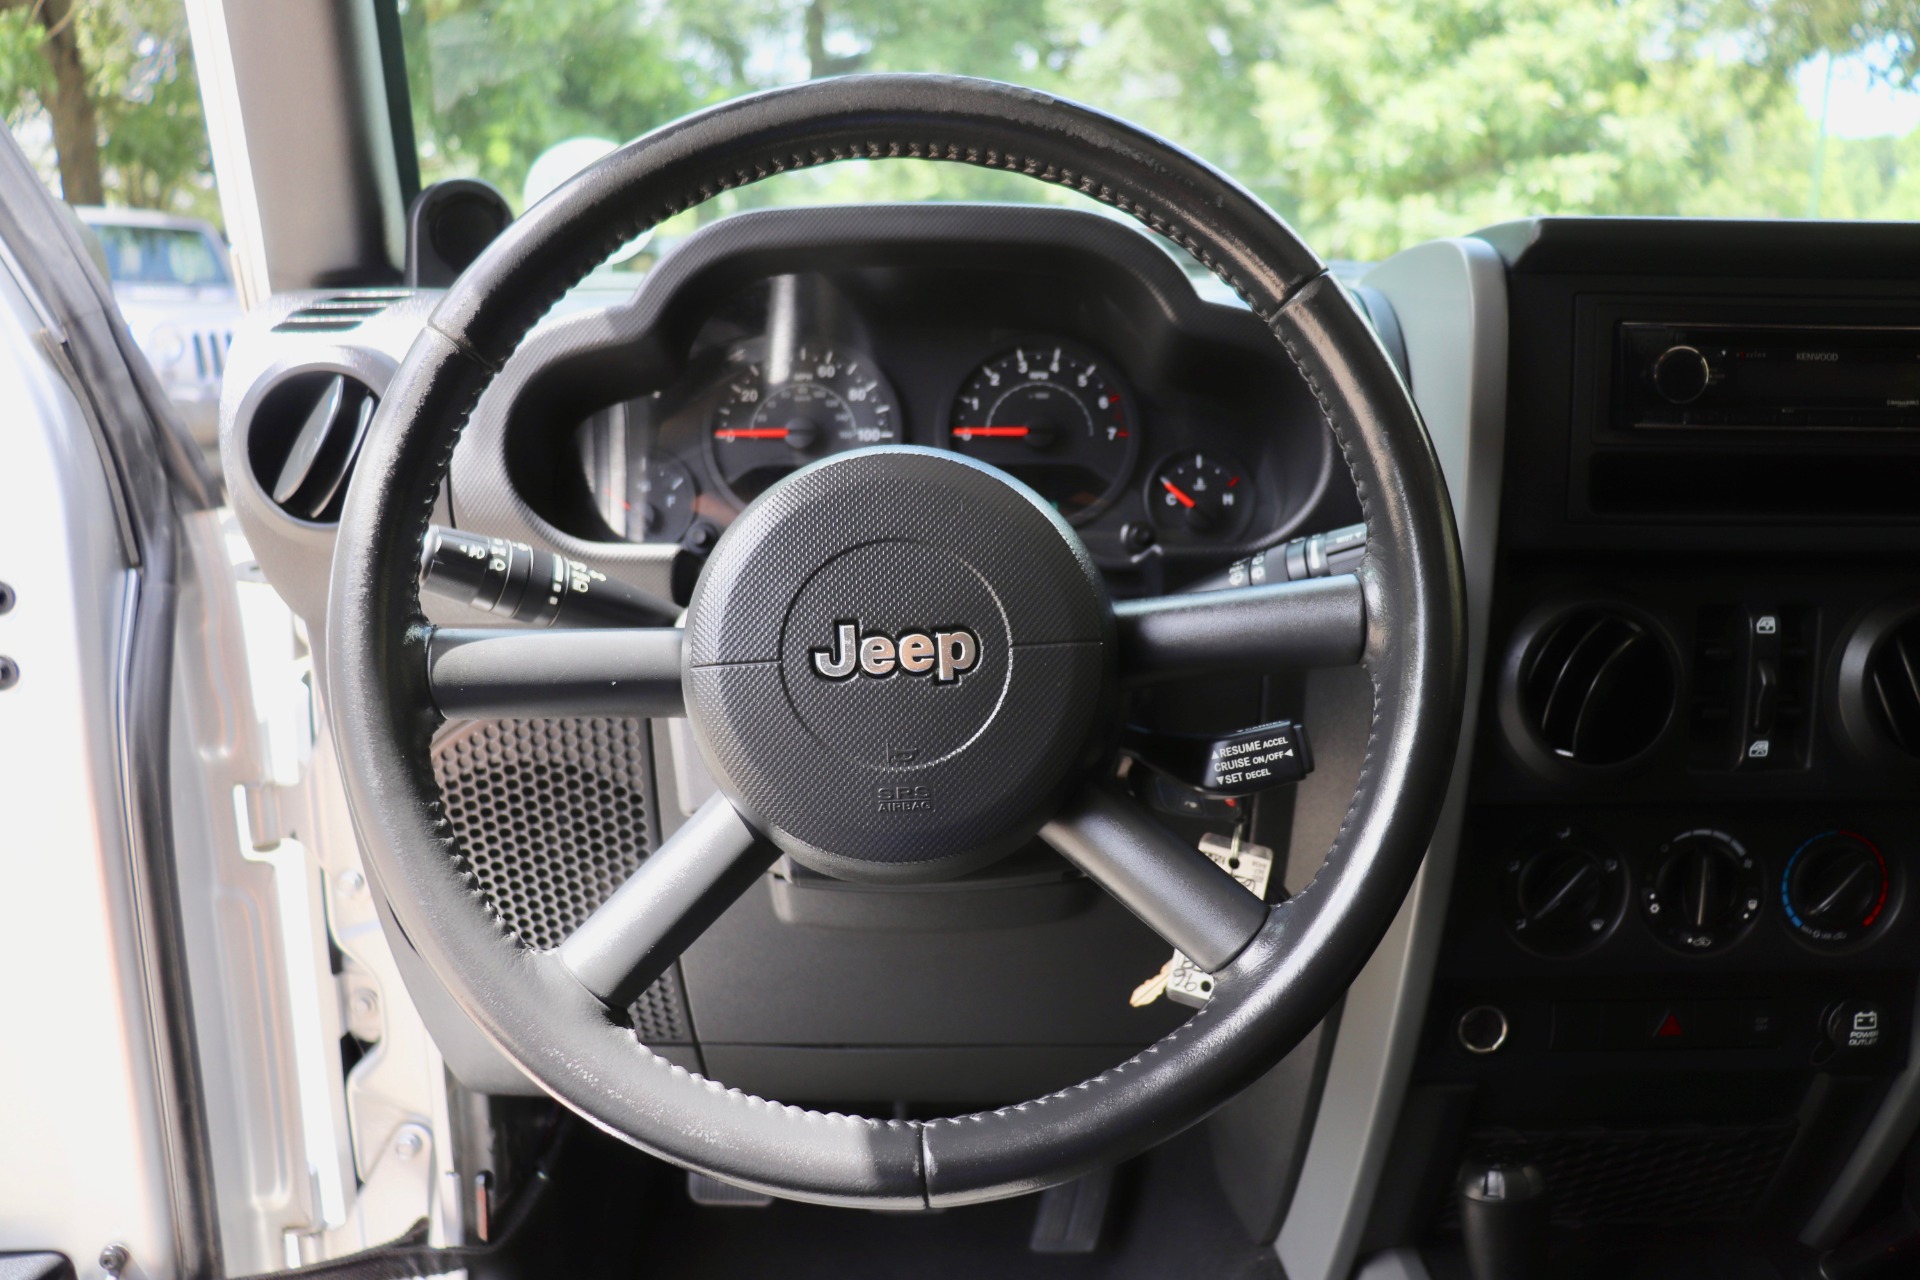 Used 2009 Jeep Wrangler Unlimited X For Sale ($18,995) | Select Jeeps Inc.  Stock #757459